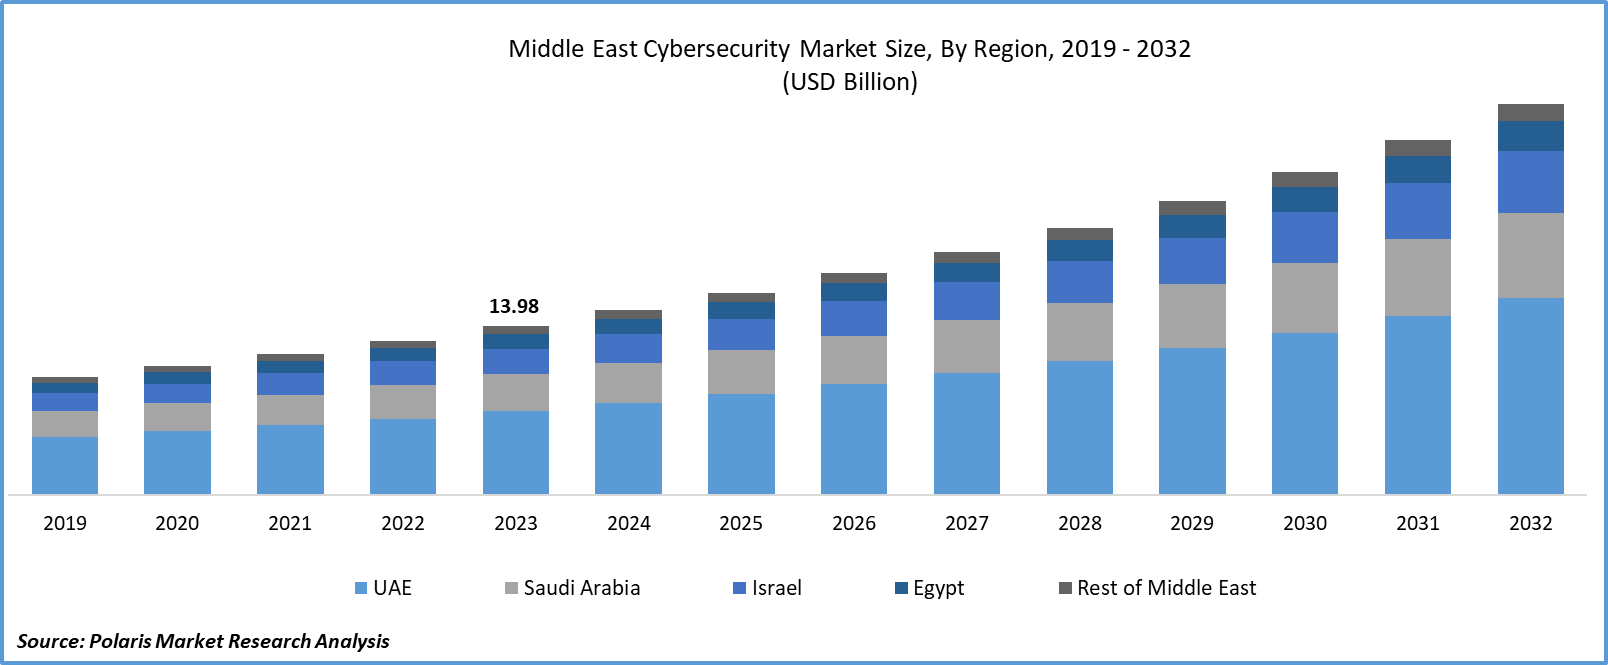 Middle East Cybersecurity Market Size